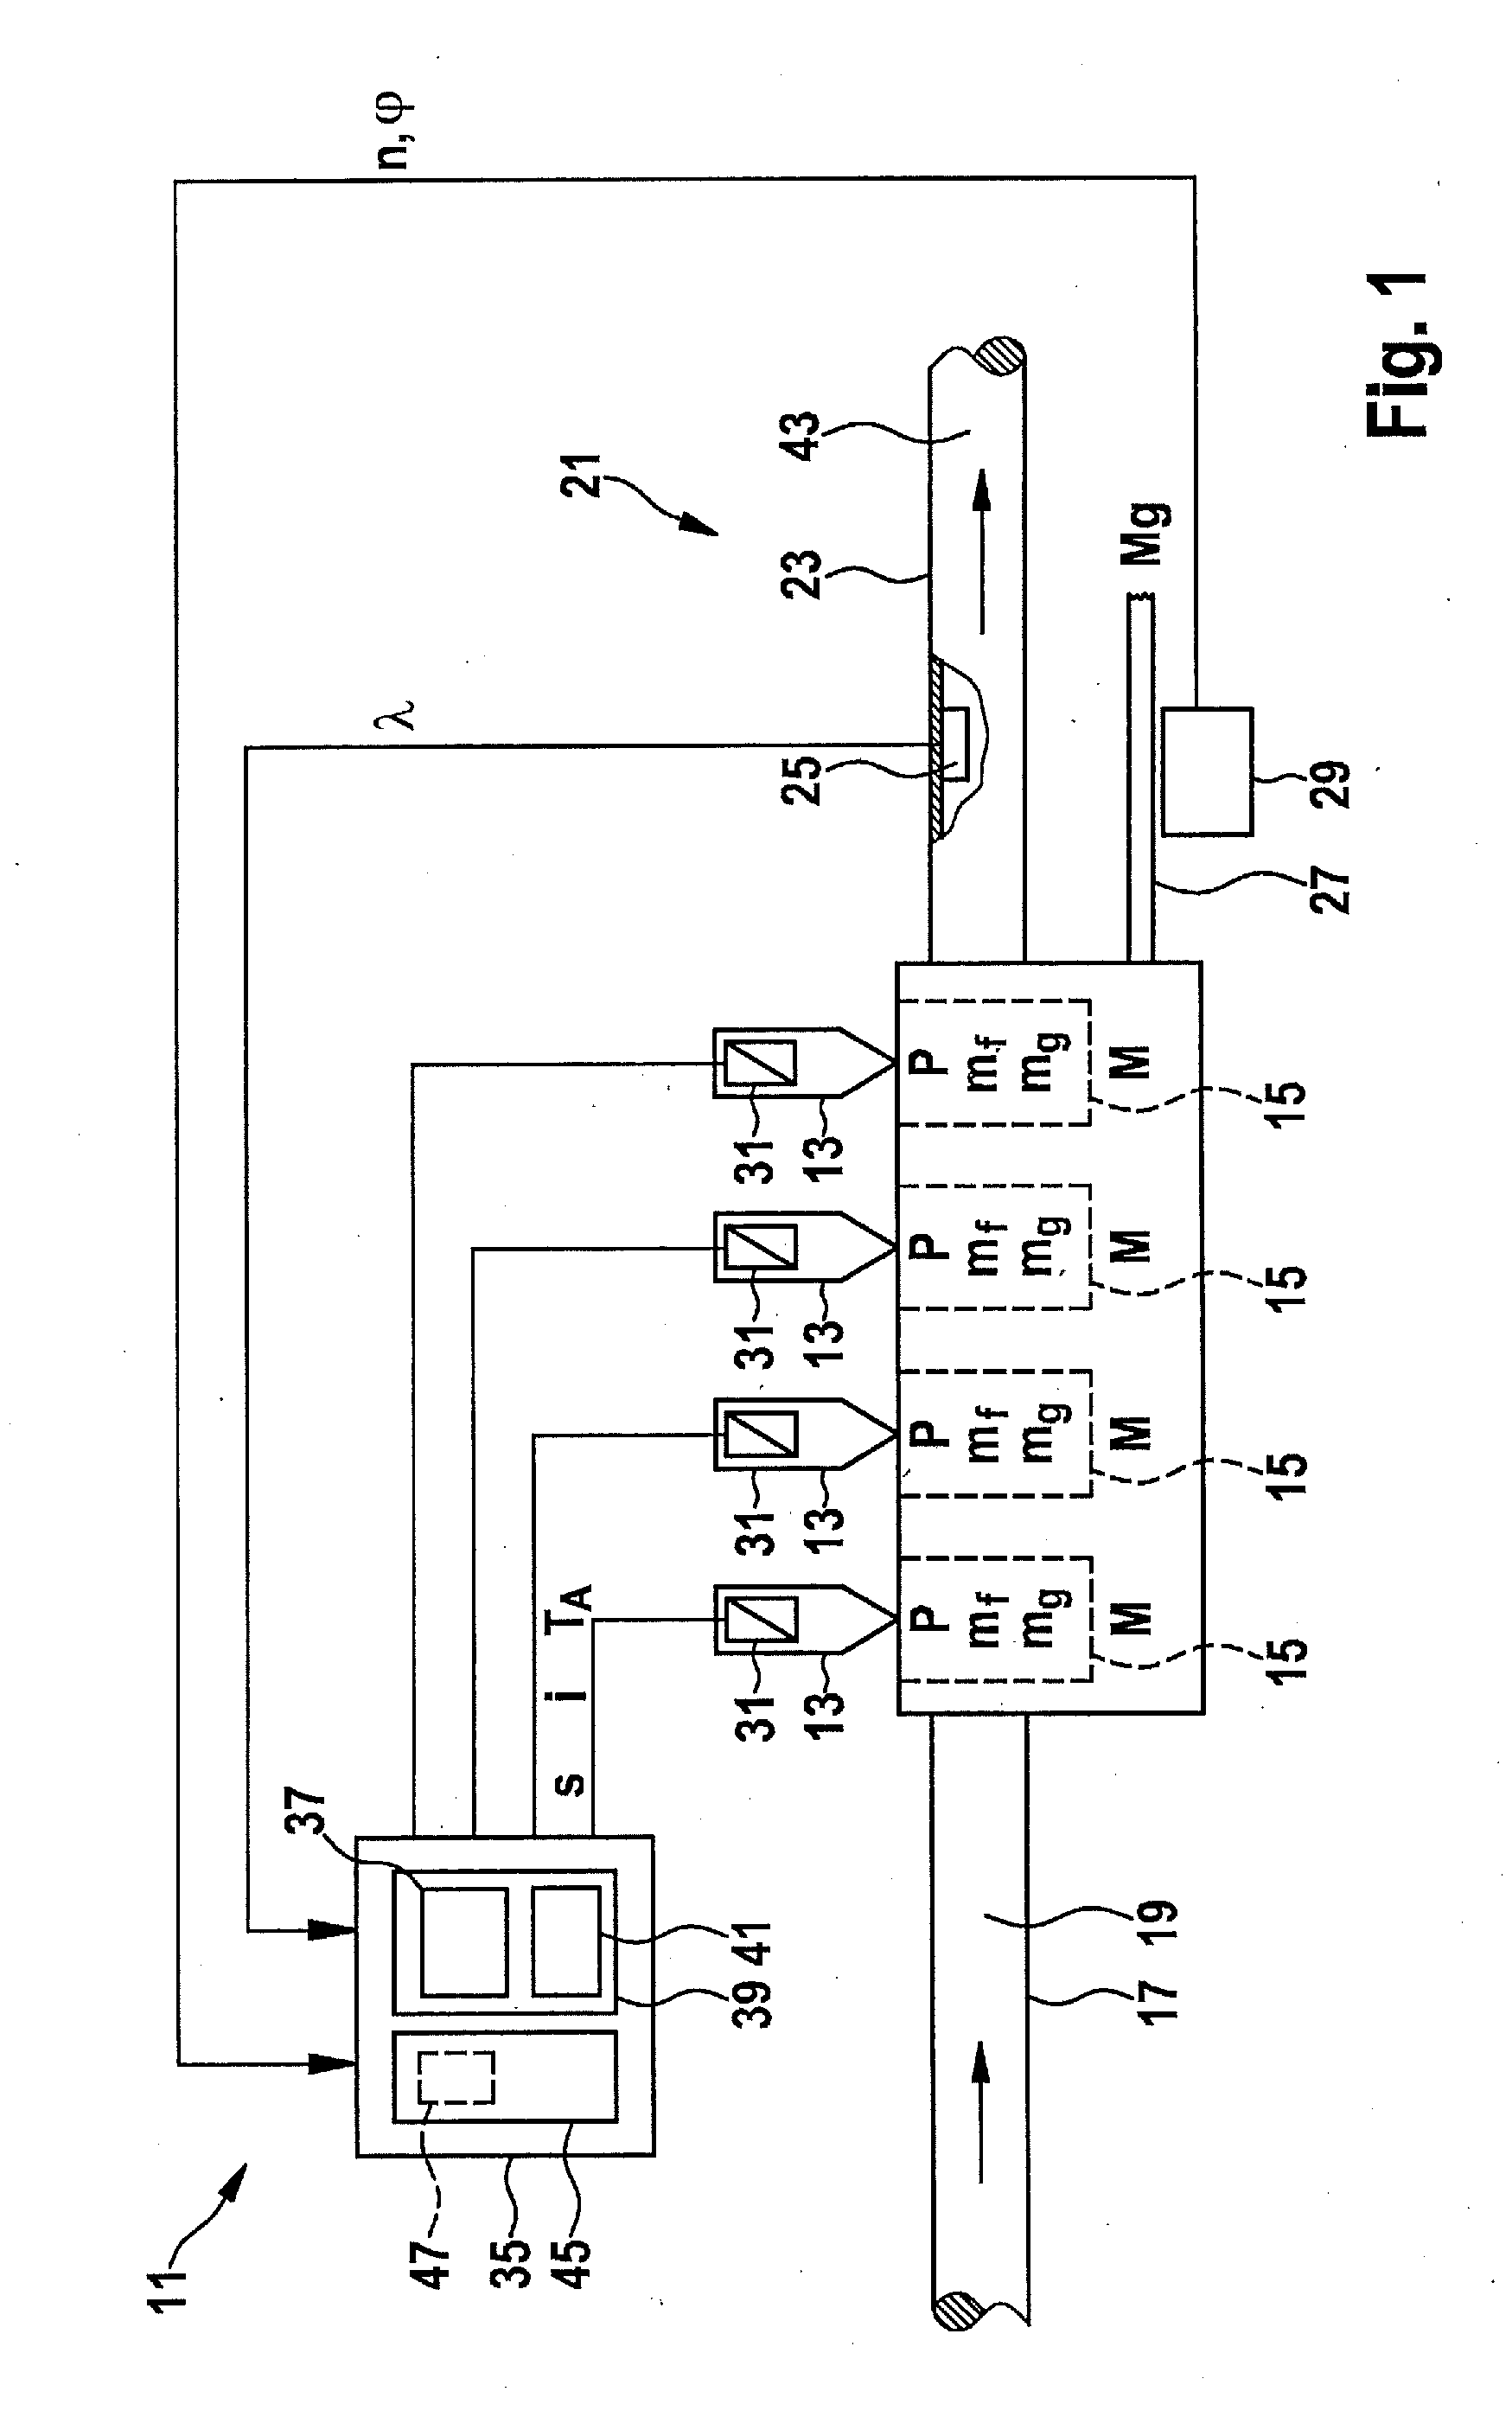 Method for operating an internal combustion engine having multiple combustion chambers, and internal combustion engine having multiple combustion chambers